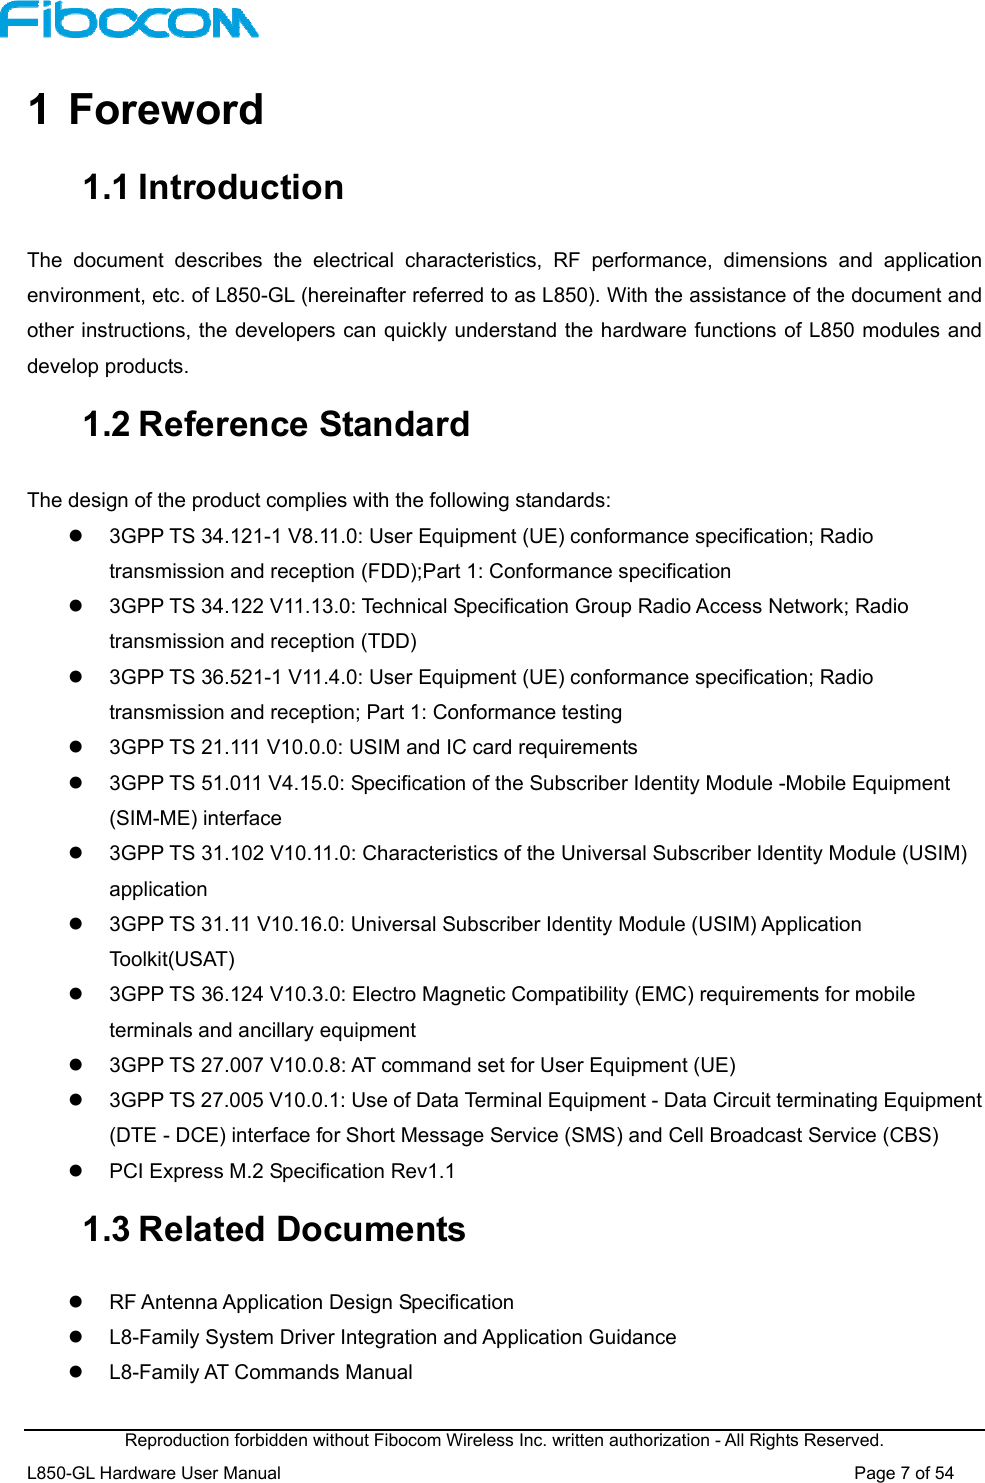  Reproduction forbidden without Fibocom Wireless Inc. written authorization - All Rights Reserved. L850-GL Hardware User Manual                                                                 Page 7 of 54 1  Foreword 1.1 Introduction The  document  describes  the  electrical  characteristics,  RF  performance,  dimensions  and  application environment, etc. of L850-GL (hereinafter referred to as L850). With the assistance of the document and other instructions, the developers can quickly understand the hardware functions of L850 modules and develop products. 1.2 Reference Standard The design of the product complies with the following standards:     3GPP TS 34.121-1 V8.11.0: User Equipment (UE) conformance specification; Radio transmission and reception (FDD);Part 1: Conformance specification   3GPP TS 34.122 V11.13.0: Technical Specification Group Radio Access Network; Radio transmission and reception (TDD)   3GPP TS 36.521-1 V11.4.0: User Equipment (UE) conformance specification; Radio transmission and reception; Part 1: Conformance testing   3GPP TS 21.111 V10.0.0: USIM and IC card requirements   3GPP TS 51.011 V4.15.0: Specification of the Subscriber Identity Module -Mobile Equipment (SIM-ME) interface   3GPP TS 31.102 V10.11.0: Characteristics of the Universal Subscriber Identity Module (USIM) application   3GPP TS 31.11 V10.16.0: Universal Subscriber Identity Module (USIM) Application Toolkit(USAT)   3GPP TS 36.124 V10.3.0: Electro Magnetic Compatibility (EMC) requirements for mobile terminals and ancillary equipment   3GPP TS 27.007 V10.0.8: AT command set for User Equipment (UE)    3GPP TS 27.005 V10.0.1: Use of Data Terminal Equipment - Data Circuit terminating Equipment (DTE - DCE) interface for Short Message Service (SMS) and Cell Broadcast Service (CBS)   PCI Express M.2 Specification Rev1.1 1.3 Related Documents   RF Antenna Application Design Specification   L8-Family System Driver Integration and Application Guidance   L8-Family AT Commands Manual   